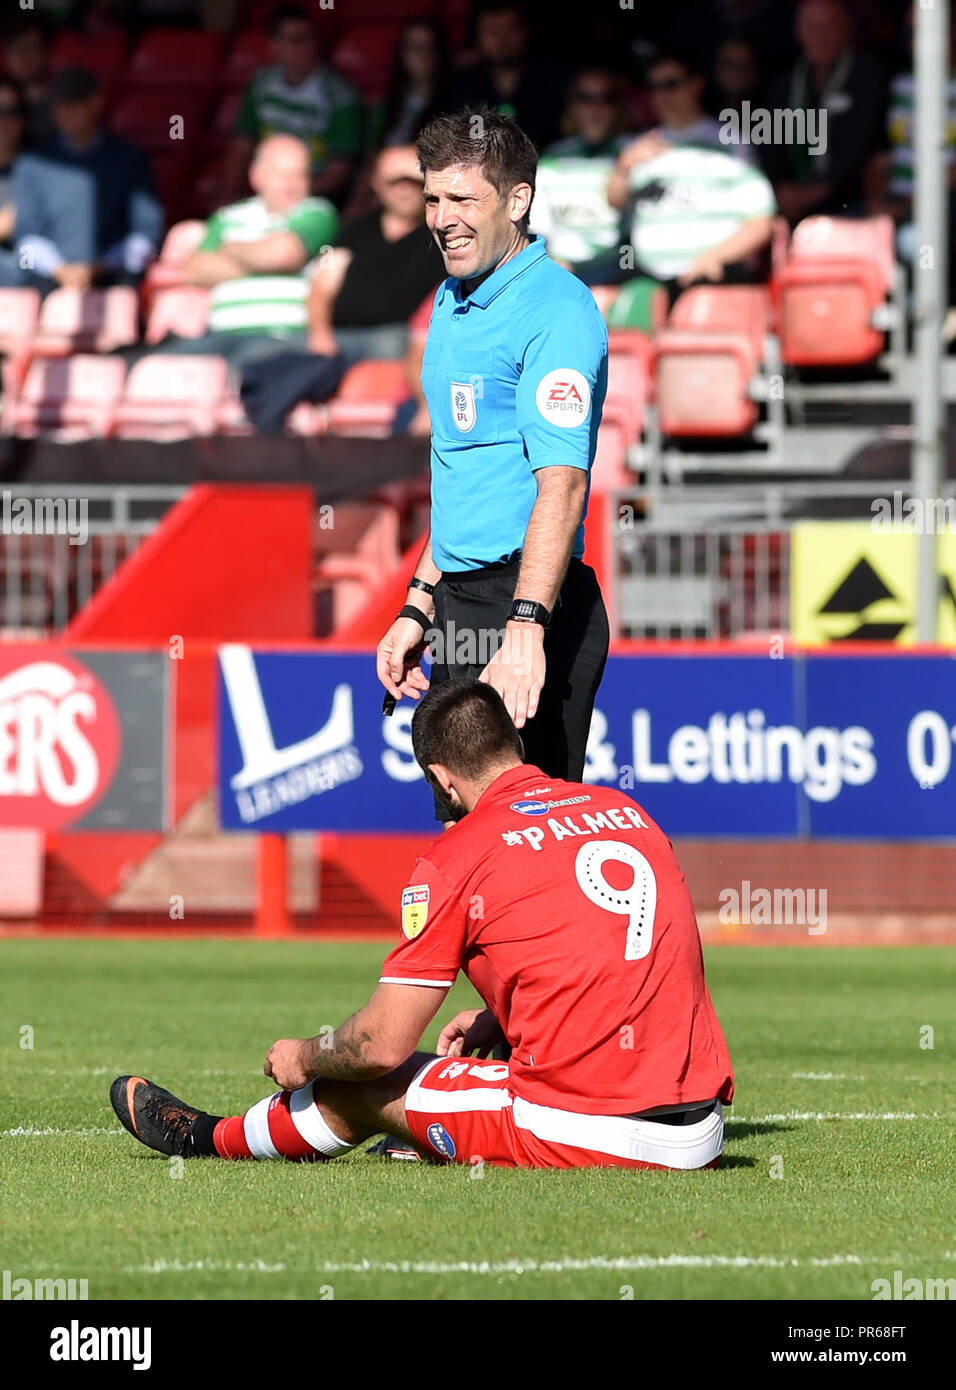 Referee Neil Hair during the Sky Bet League 2 match between Crawley Town and Yeovil Town at the Broadfield Stadium , Crawley , 29 Sept 2018 Editorial use only. No merchandising. For Football images FA and Premier League restrictions apply inc. no internet/mobile usage without FAPL license - for details contact Football Dataco Stock Photo